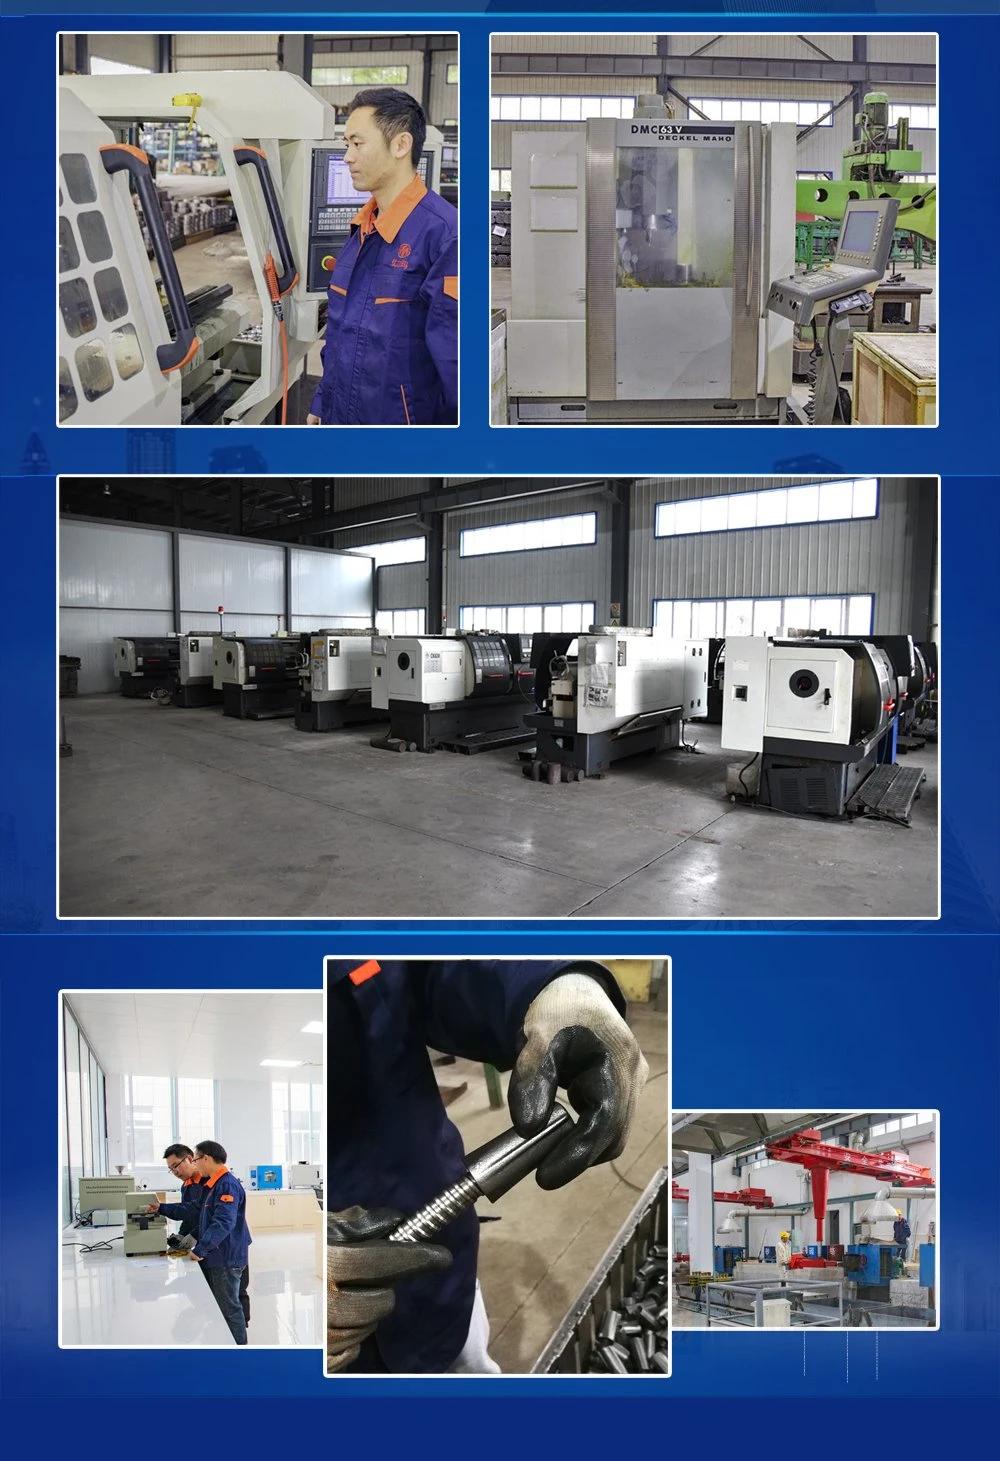 Casting,Warehouse,Equipment,Accessories,Machining,Mating Facility,Train,Underground,Wire System,Power Station,Hot Galvanzied,Basement,Electricity,Nuts,Plug